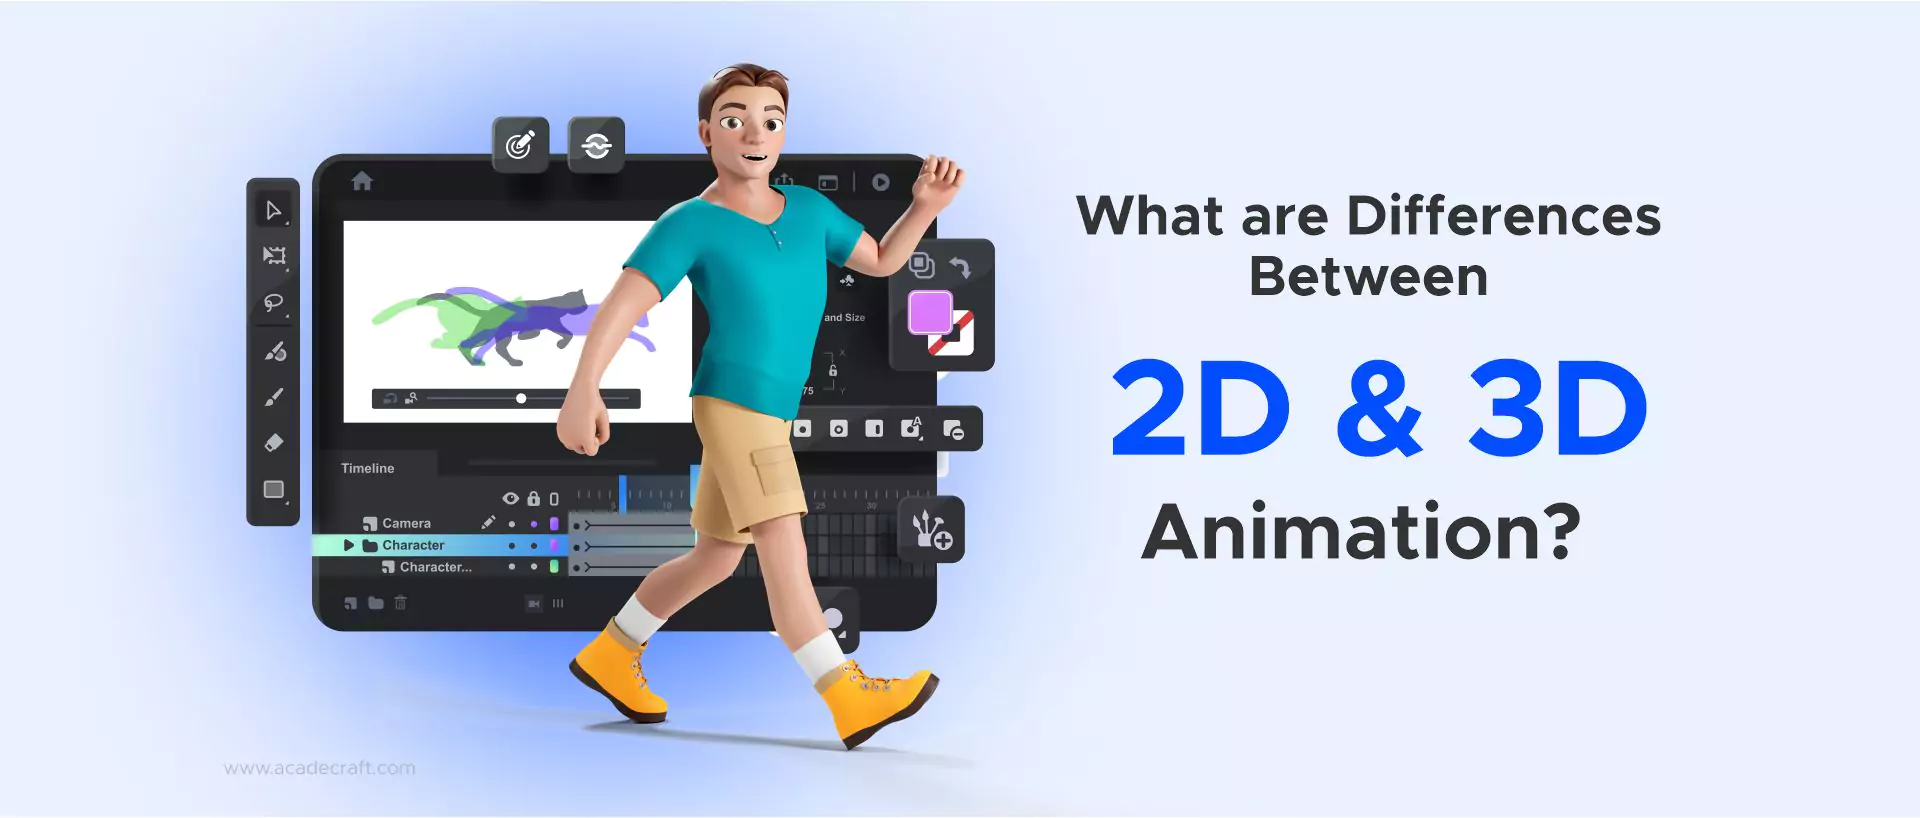 2d presentation and 3d difference